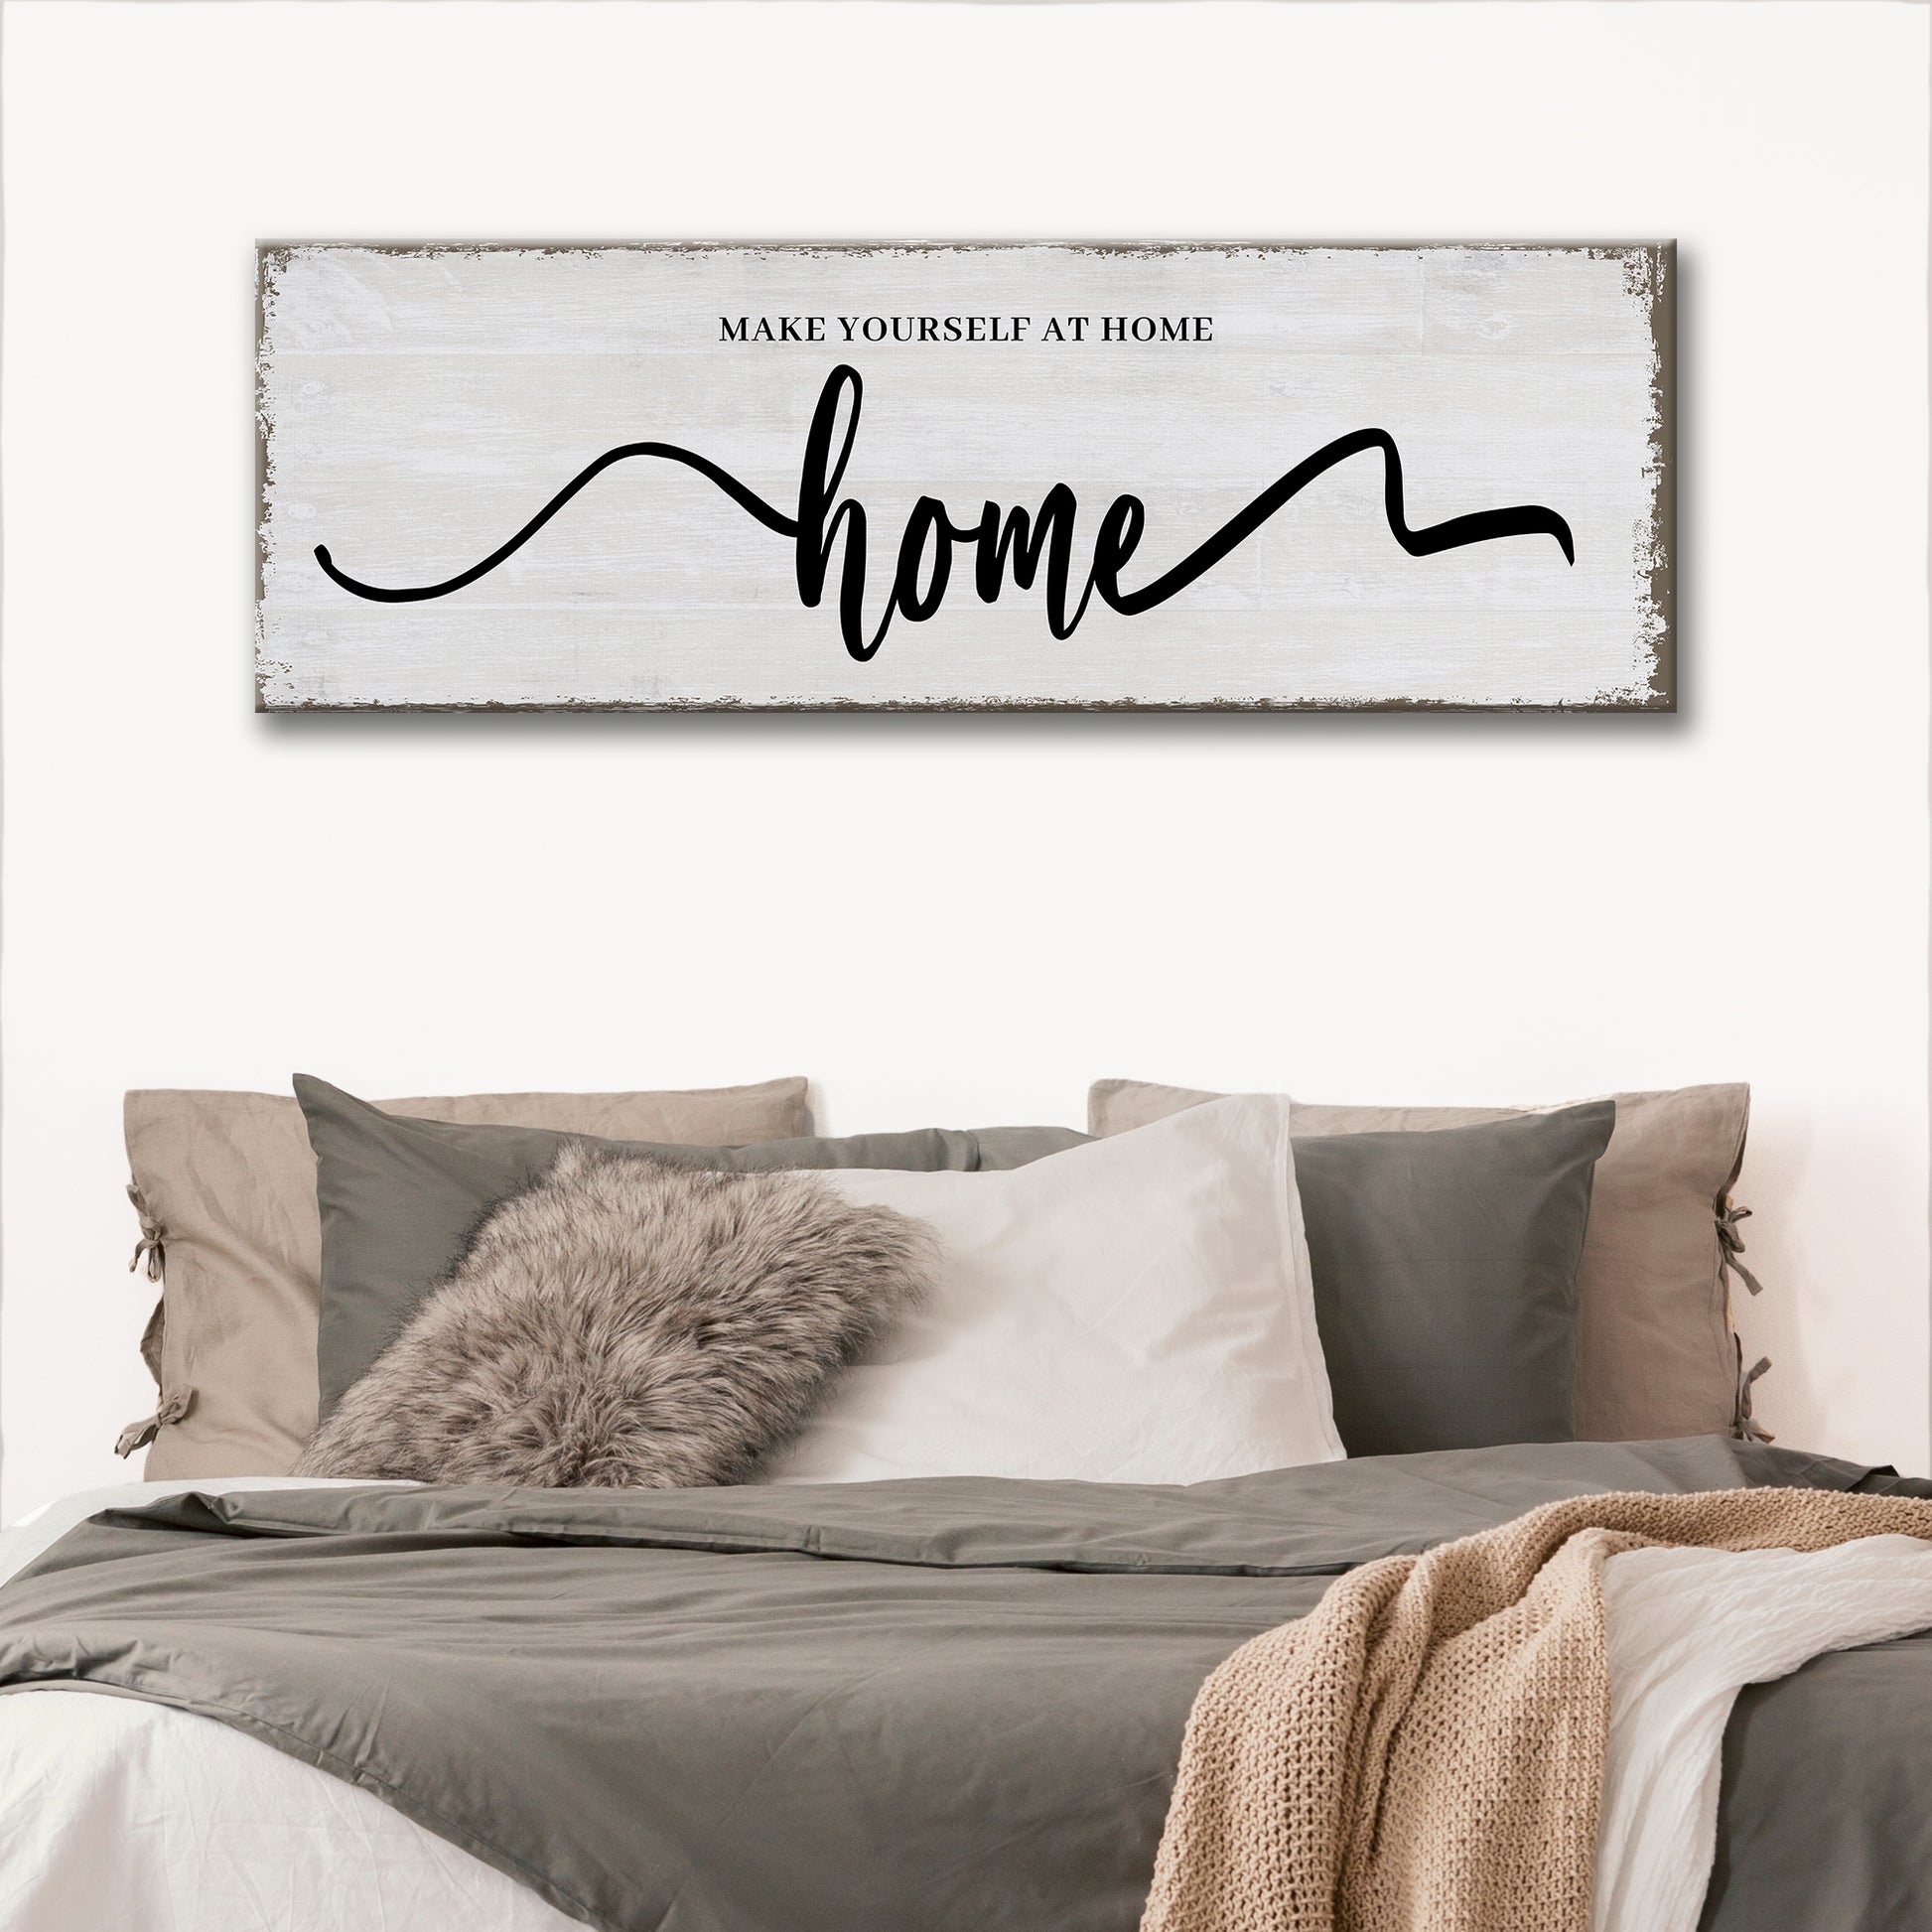 Make Yourself At Home Style 3 - Image by Tailored Canvases